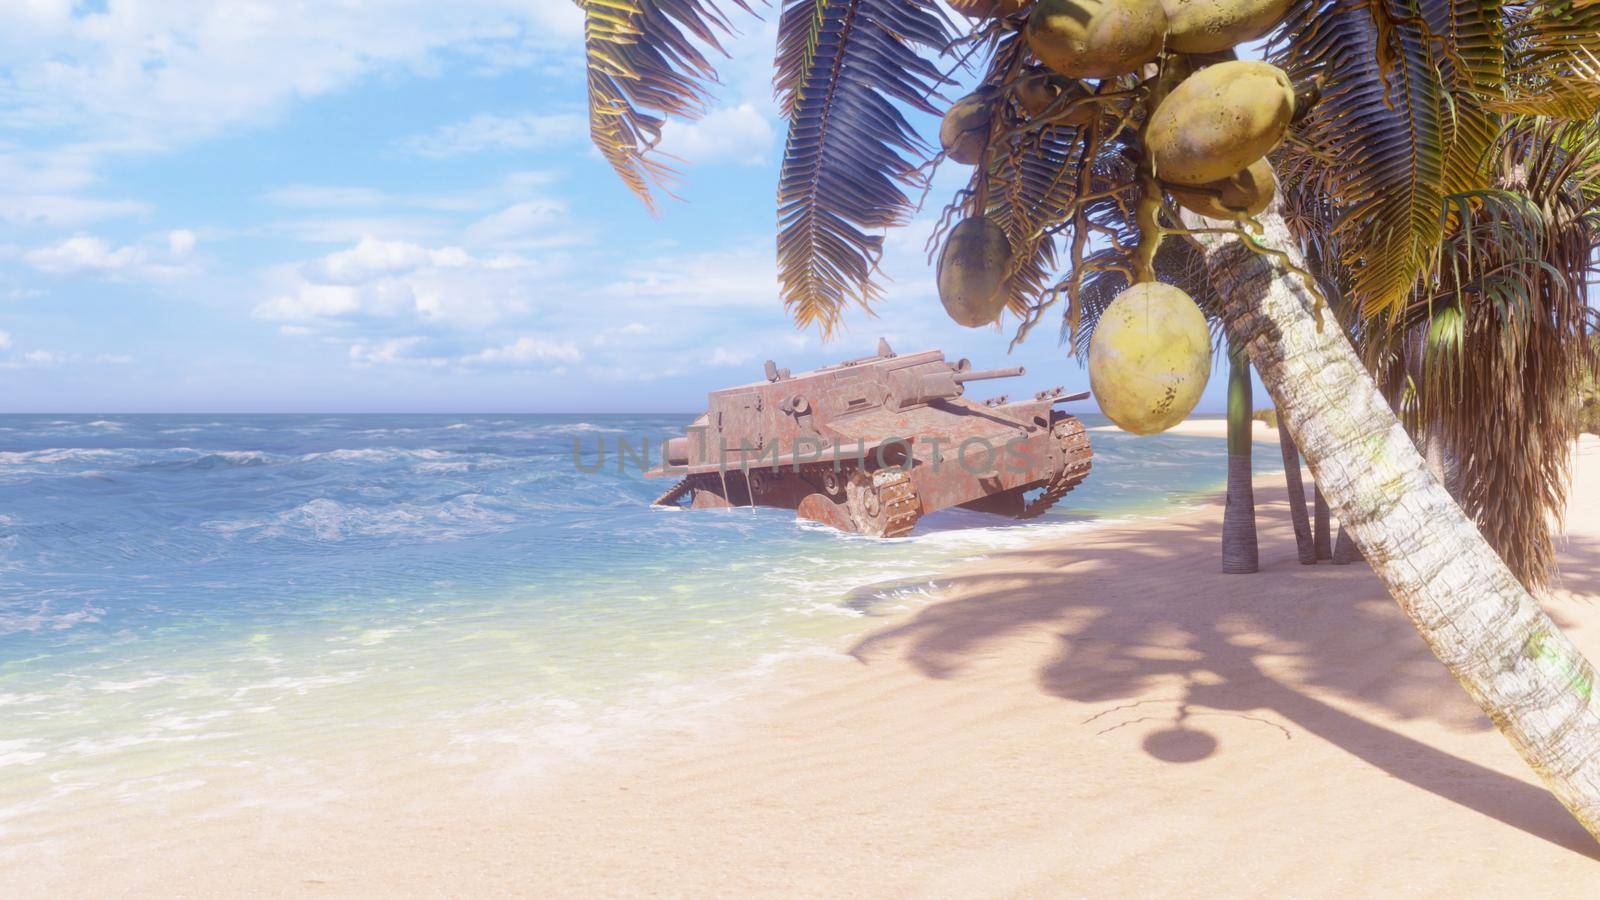 A rusty abandoned world war II tank lies on the beach of an uninhabited tropical island. 3D Rendering. by designprojects